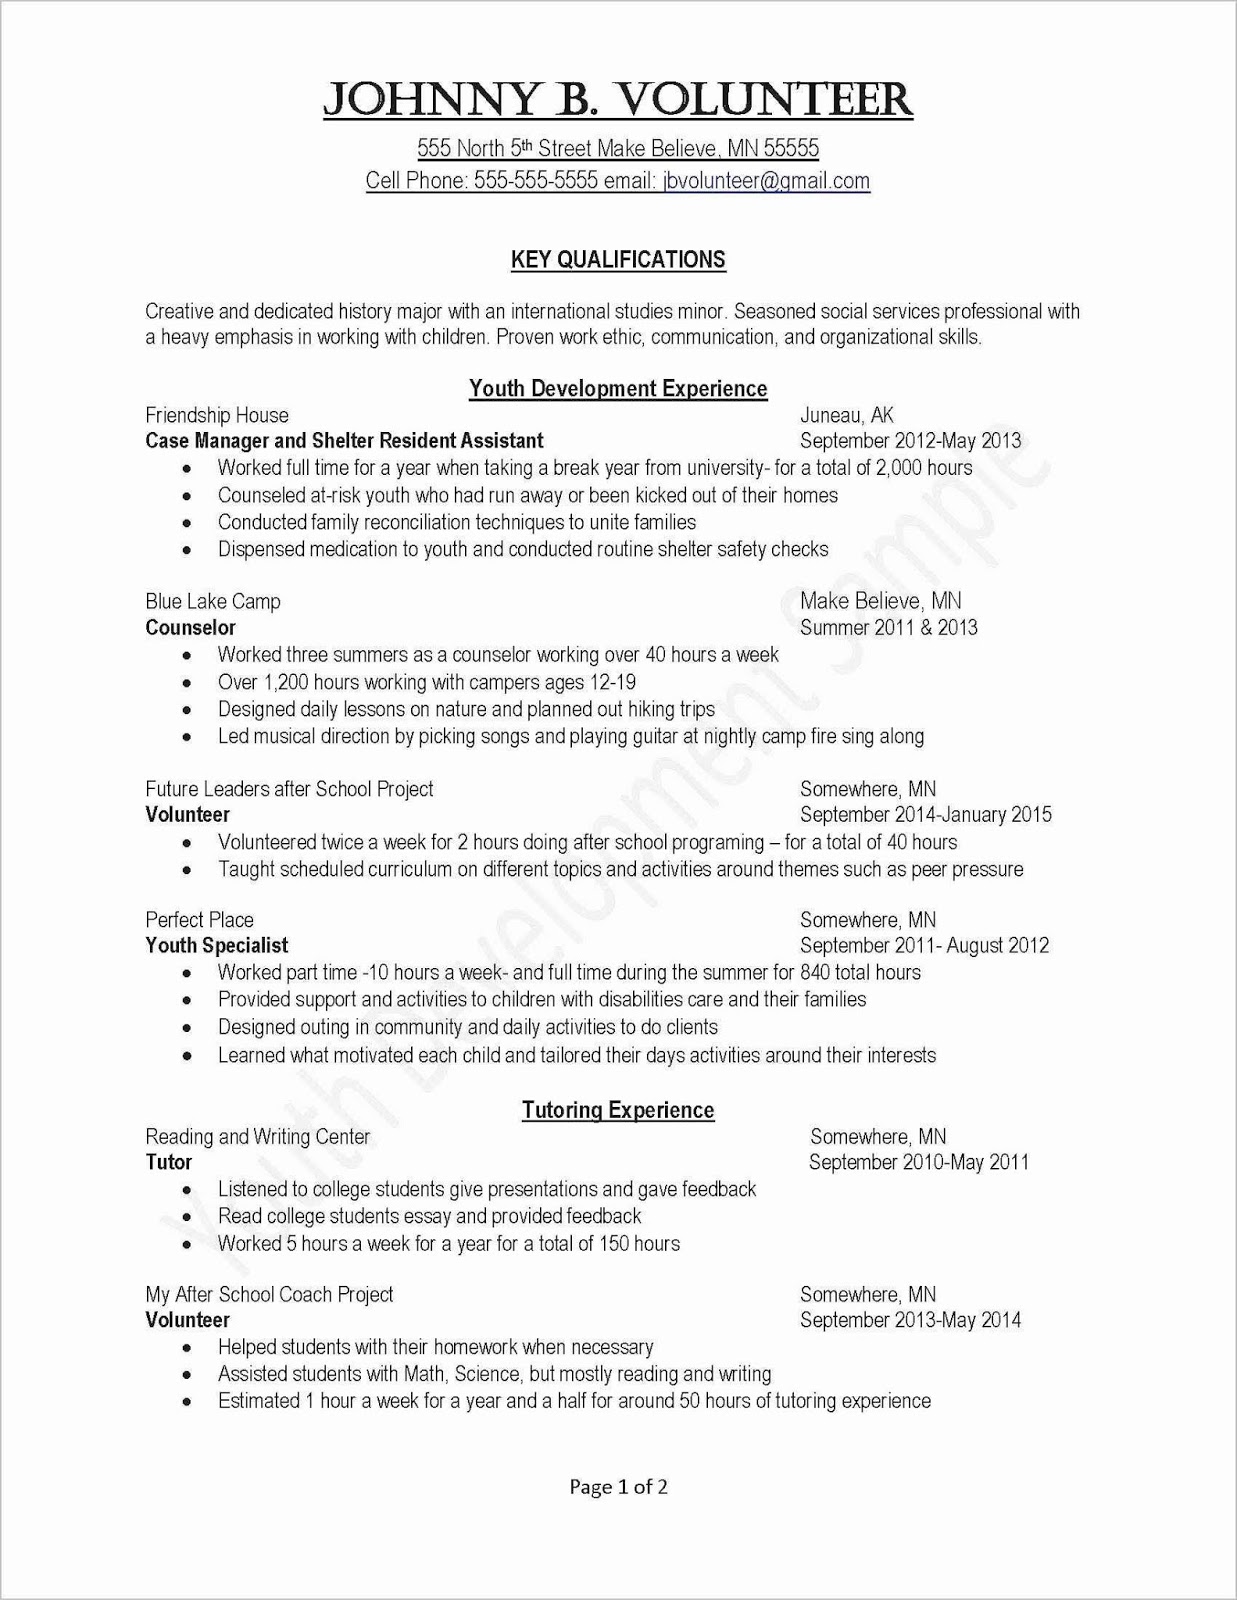 cosmetologist resume example, cosmetologist resume examples newly licensed, cosmetologist resume sample, cosmetologist skills resume example 2019, entry level cosmetologist resume examples 2020, resume example for a cosmetologist, cosmetology resume examples beginners,